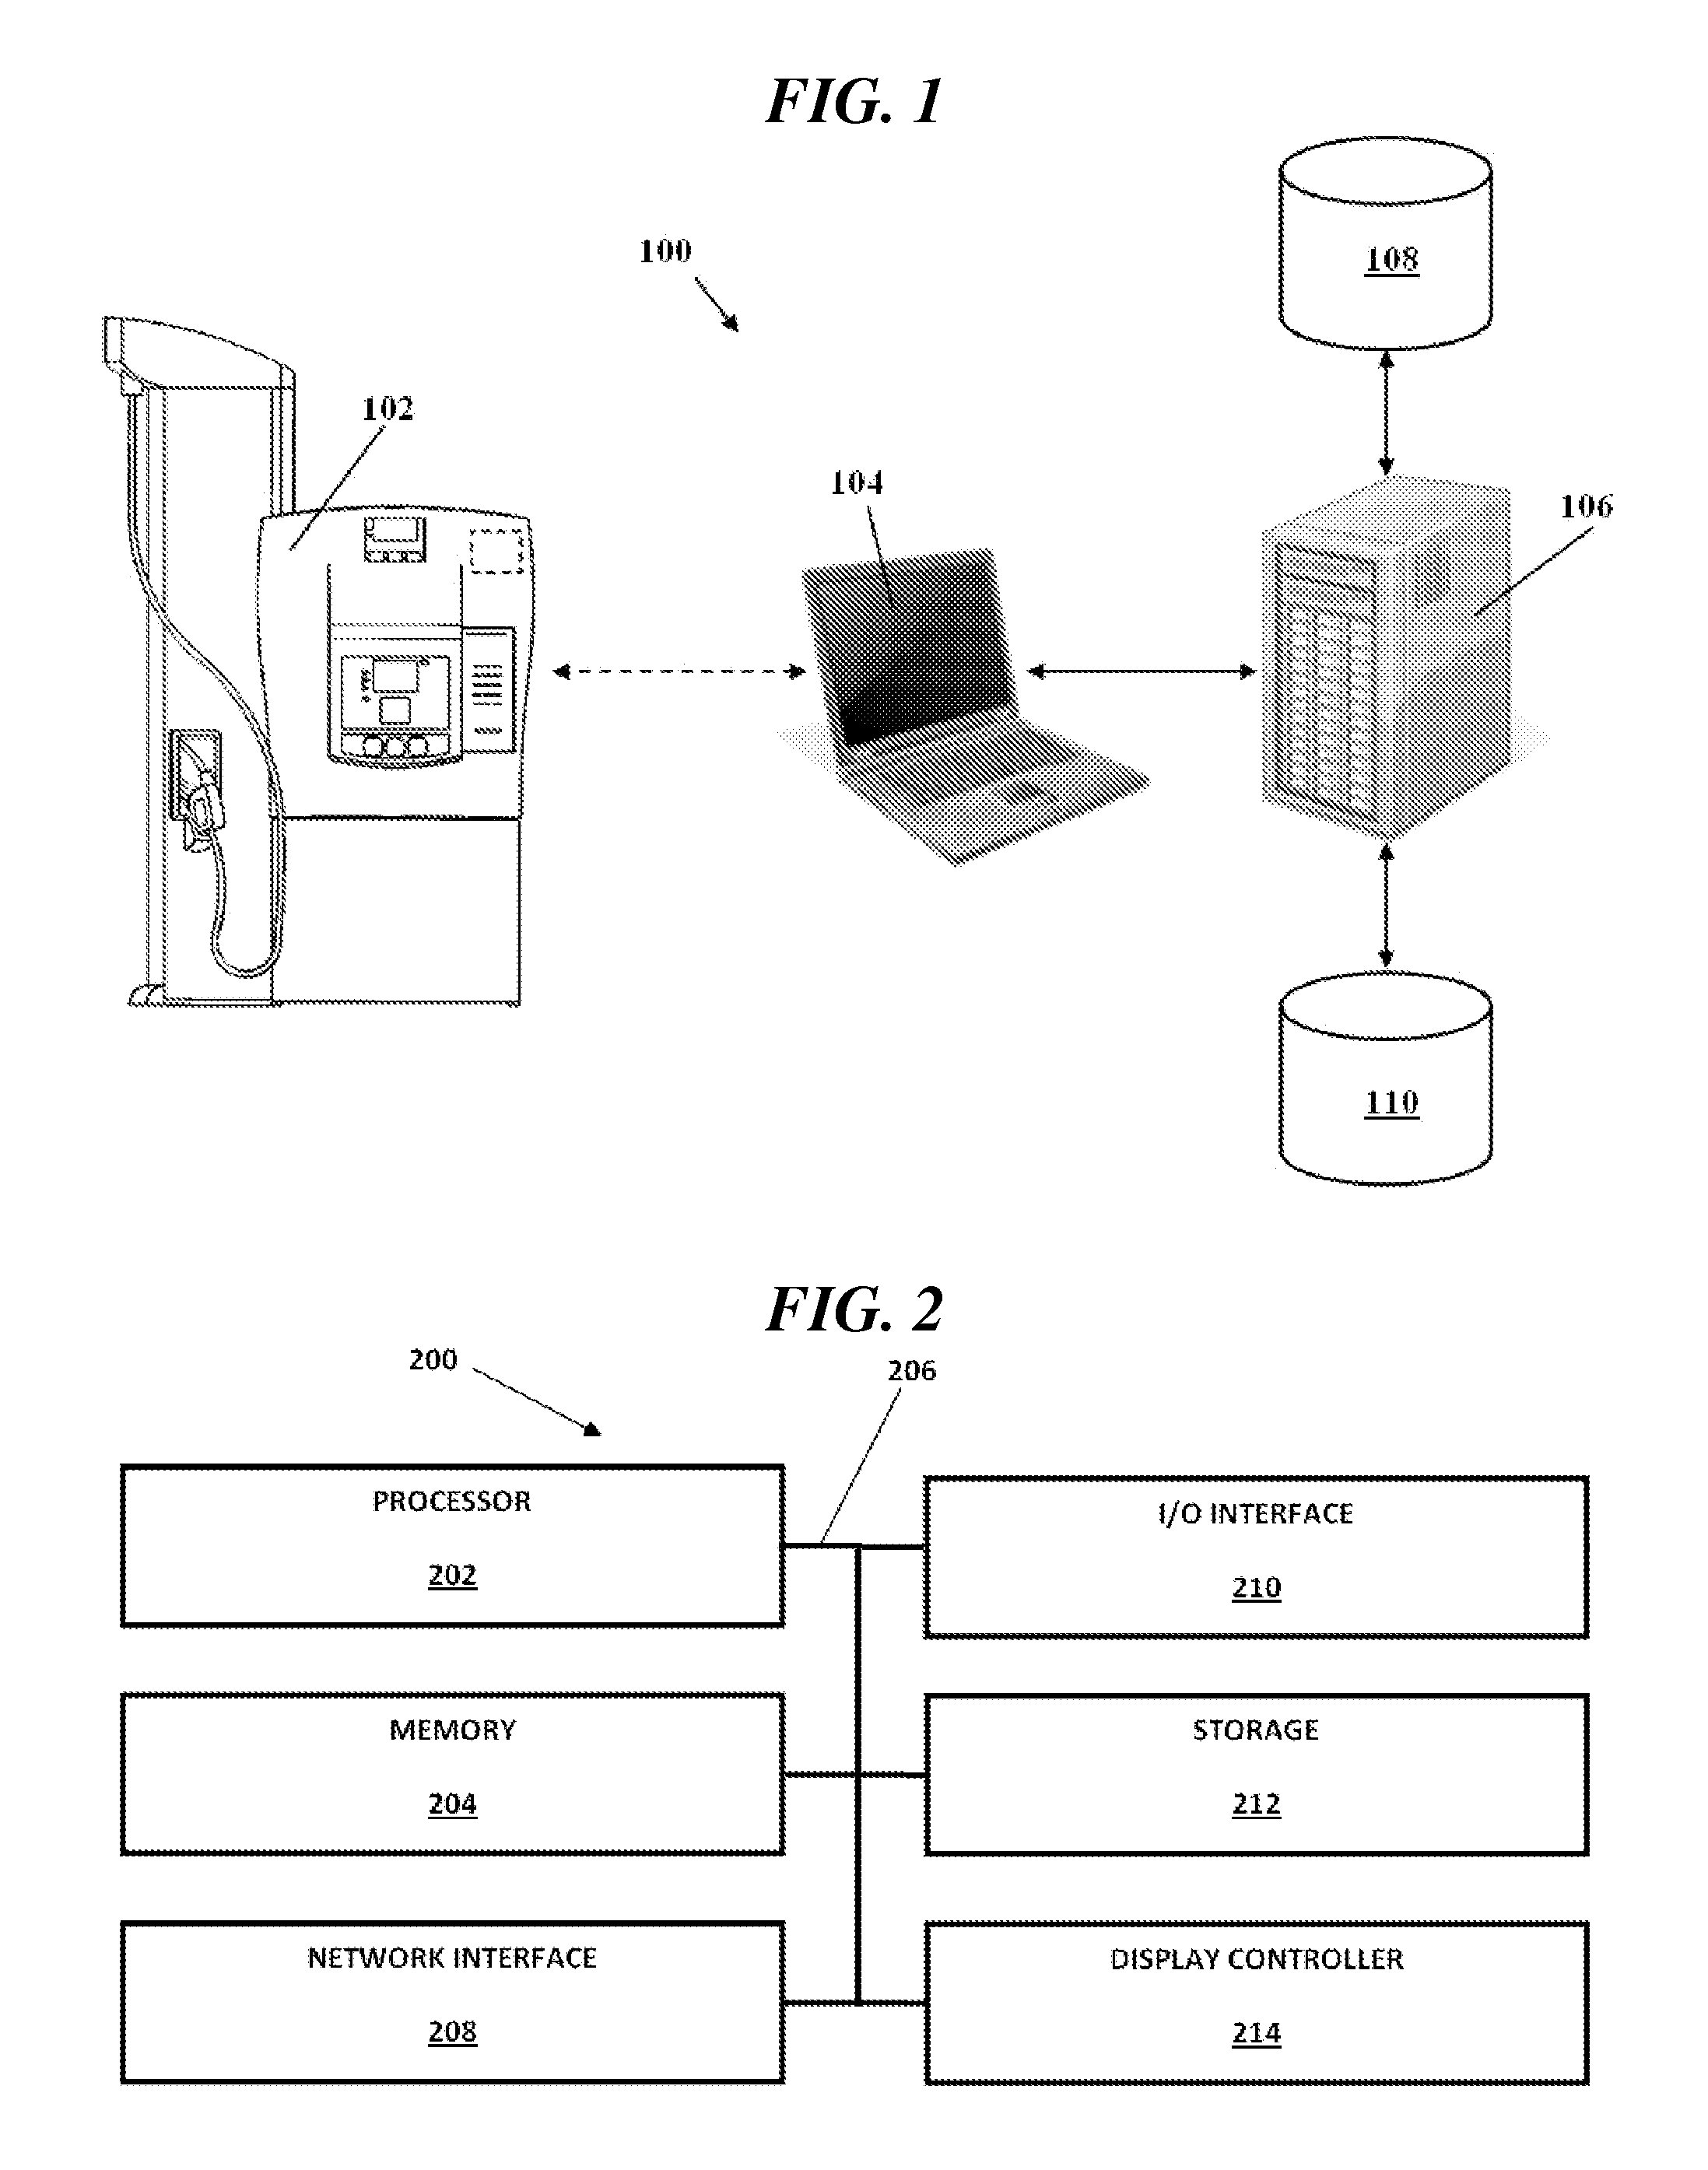 Systems and methods for fuel dispenser security